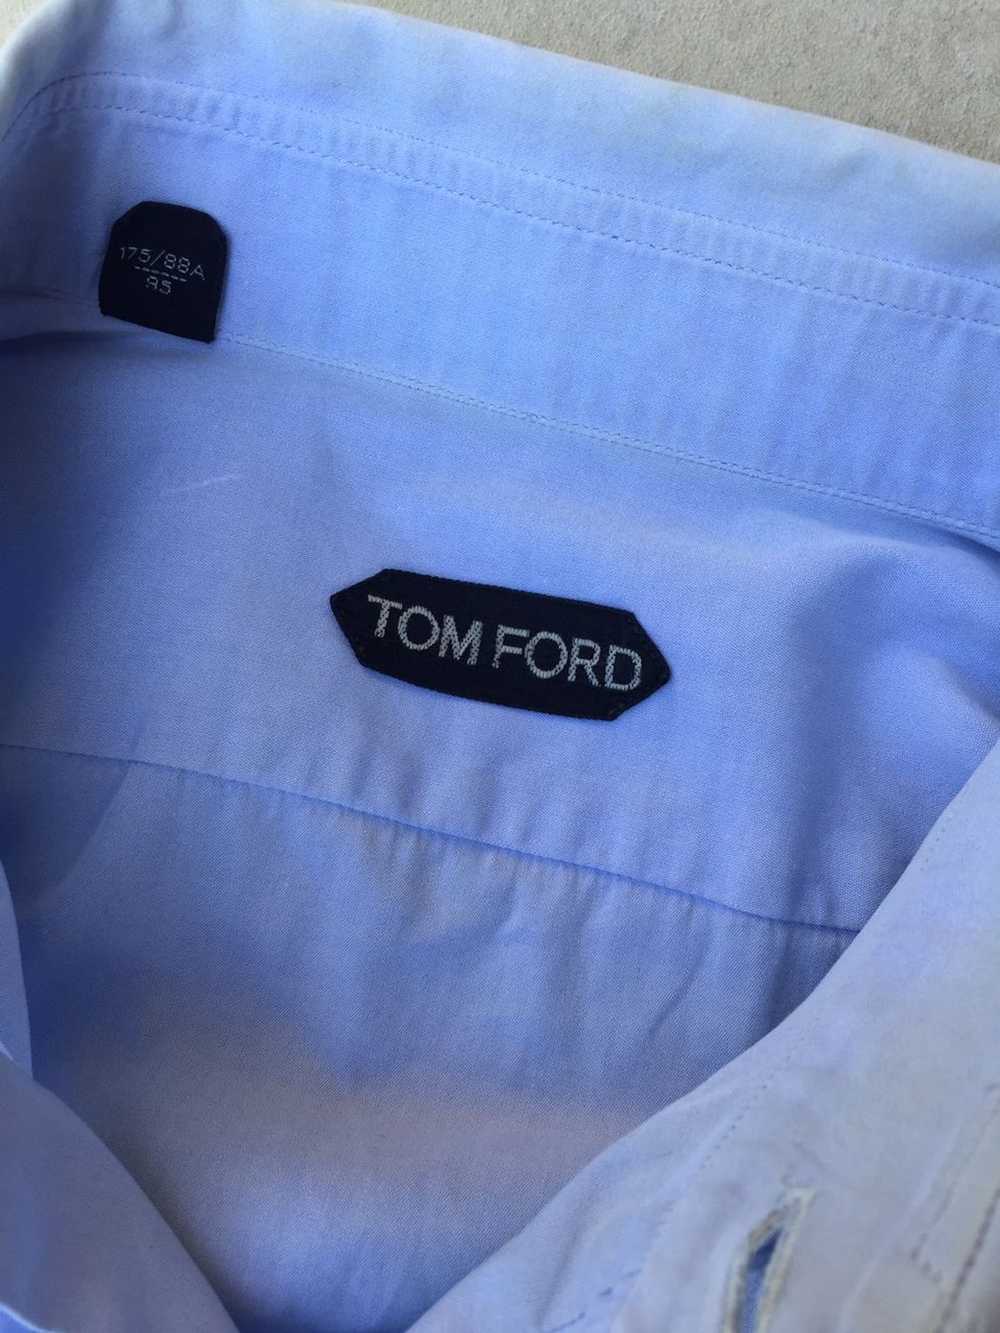 Tom Ford Tom Ford French Cuff button ups shirt - image 11